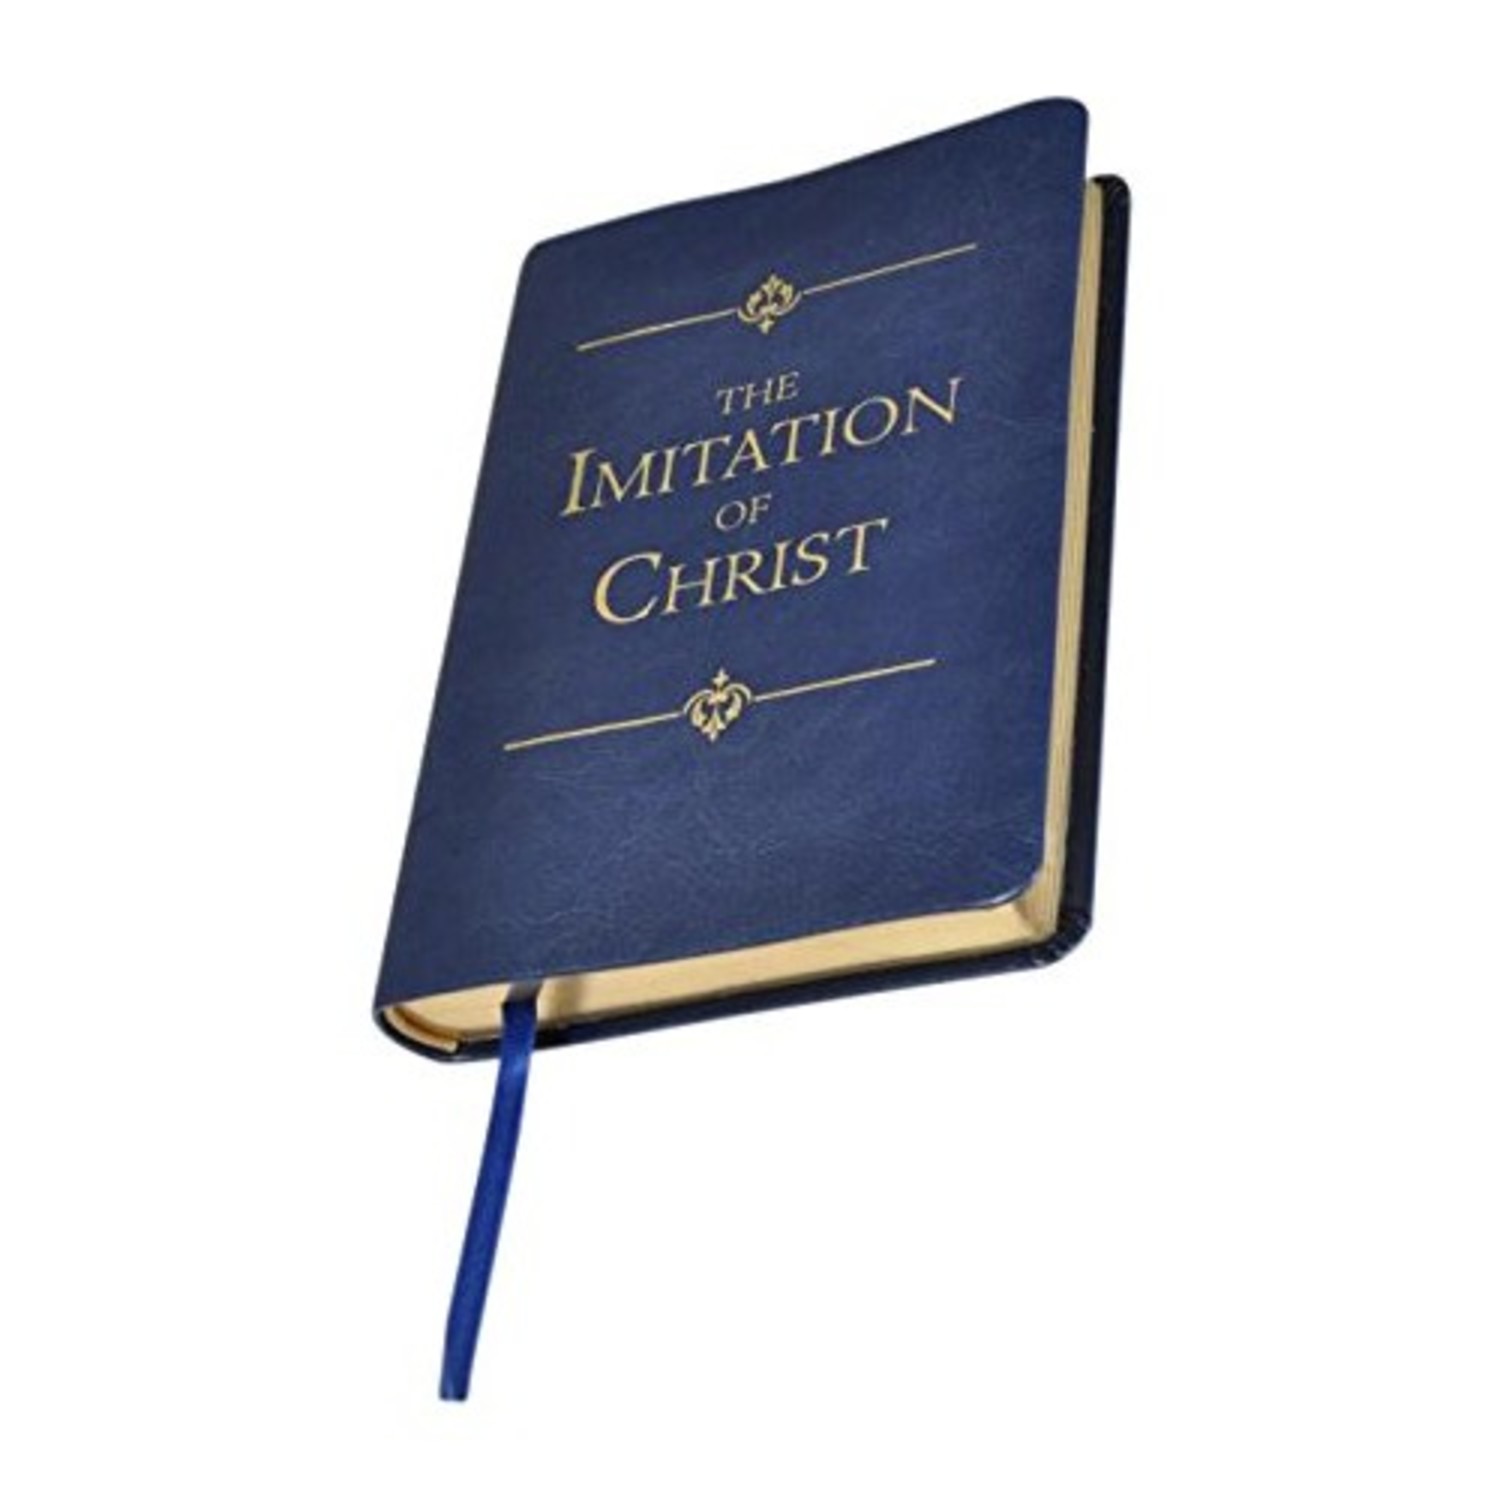 Cover image from the book, The Imitation of Christ